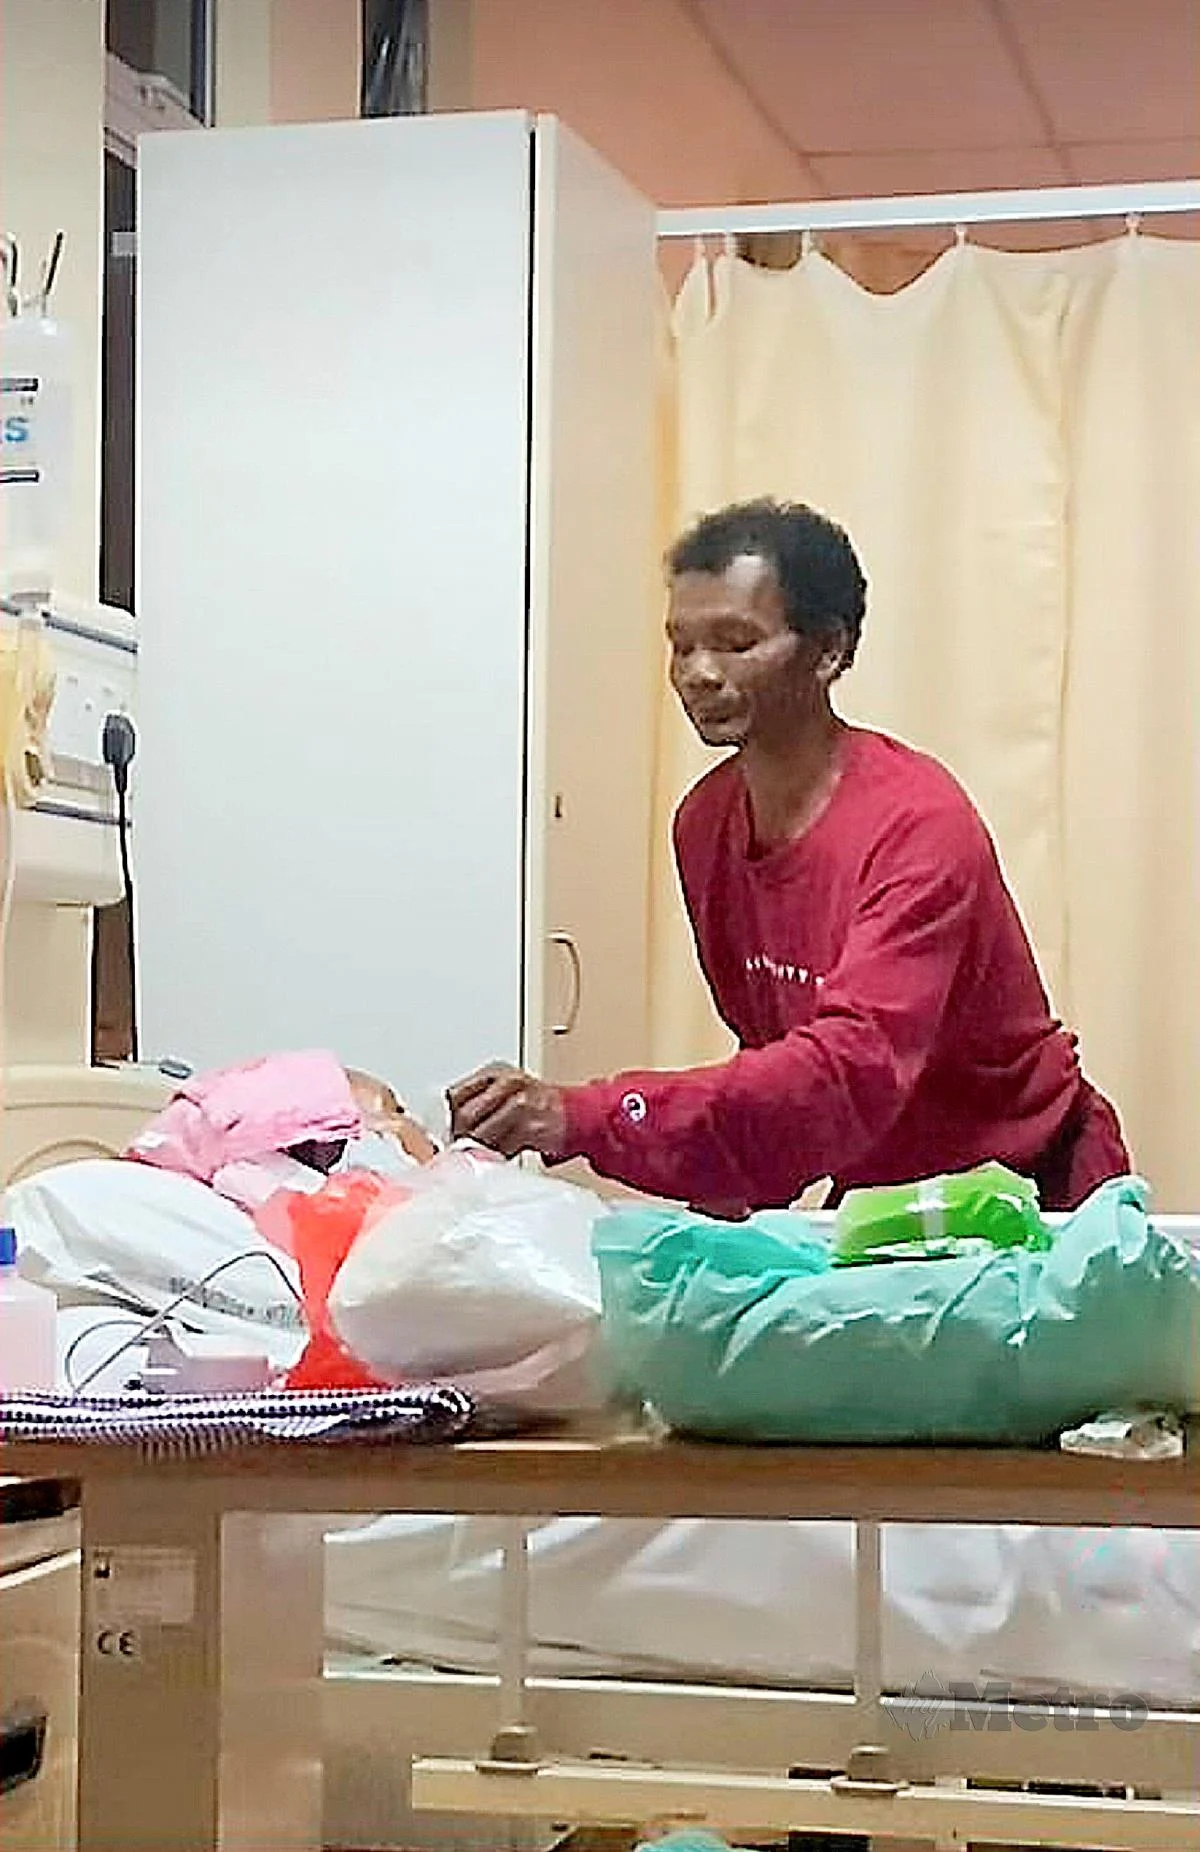 Despite his wife being in a coma for the past two months, an orang asli man from gua musang, kelantan, remains hopeful that she will recover and has not lost faith in her ability to overcome the illness.